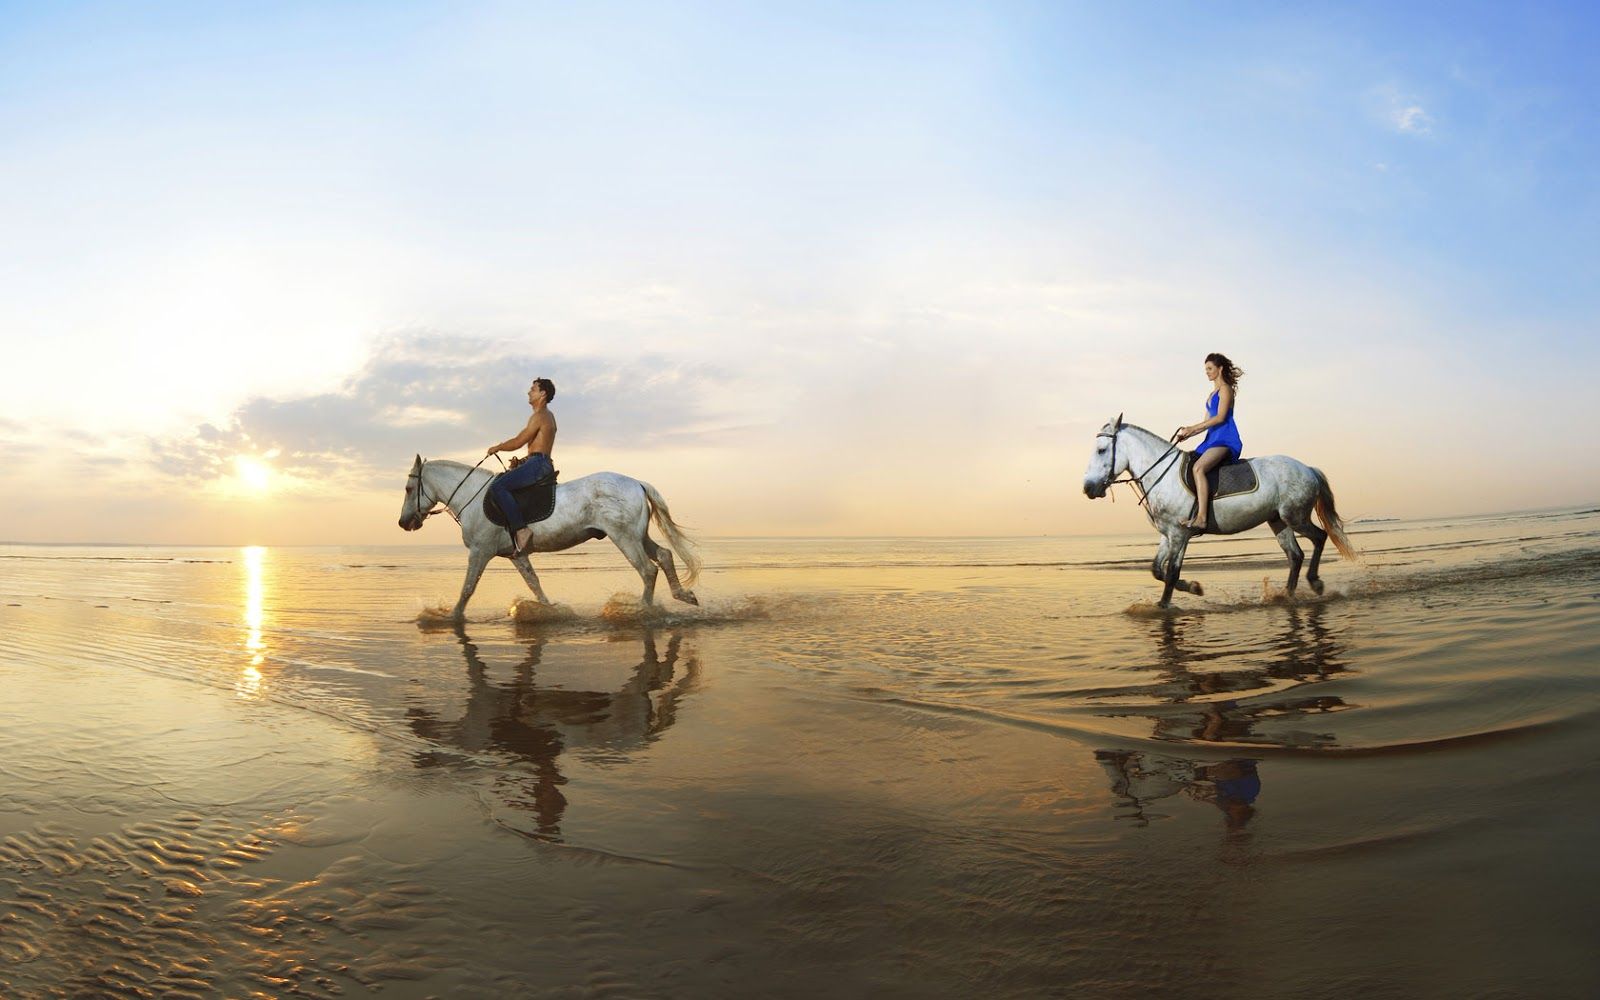 Two people horseback riding on the beach ~ Trends Wallpaper